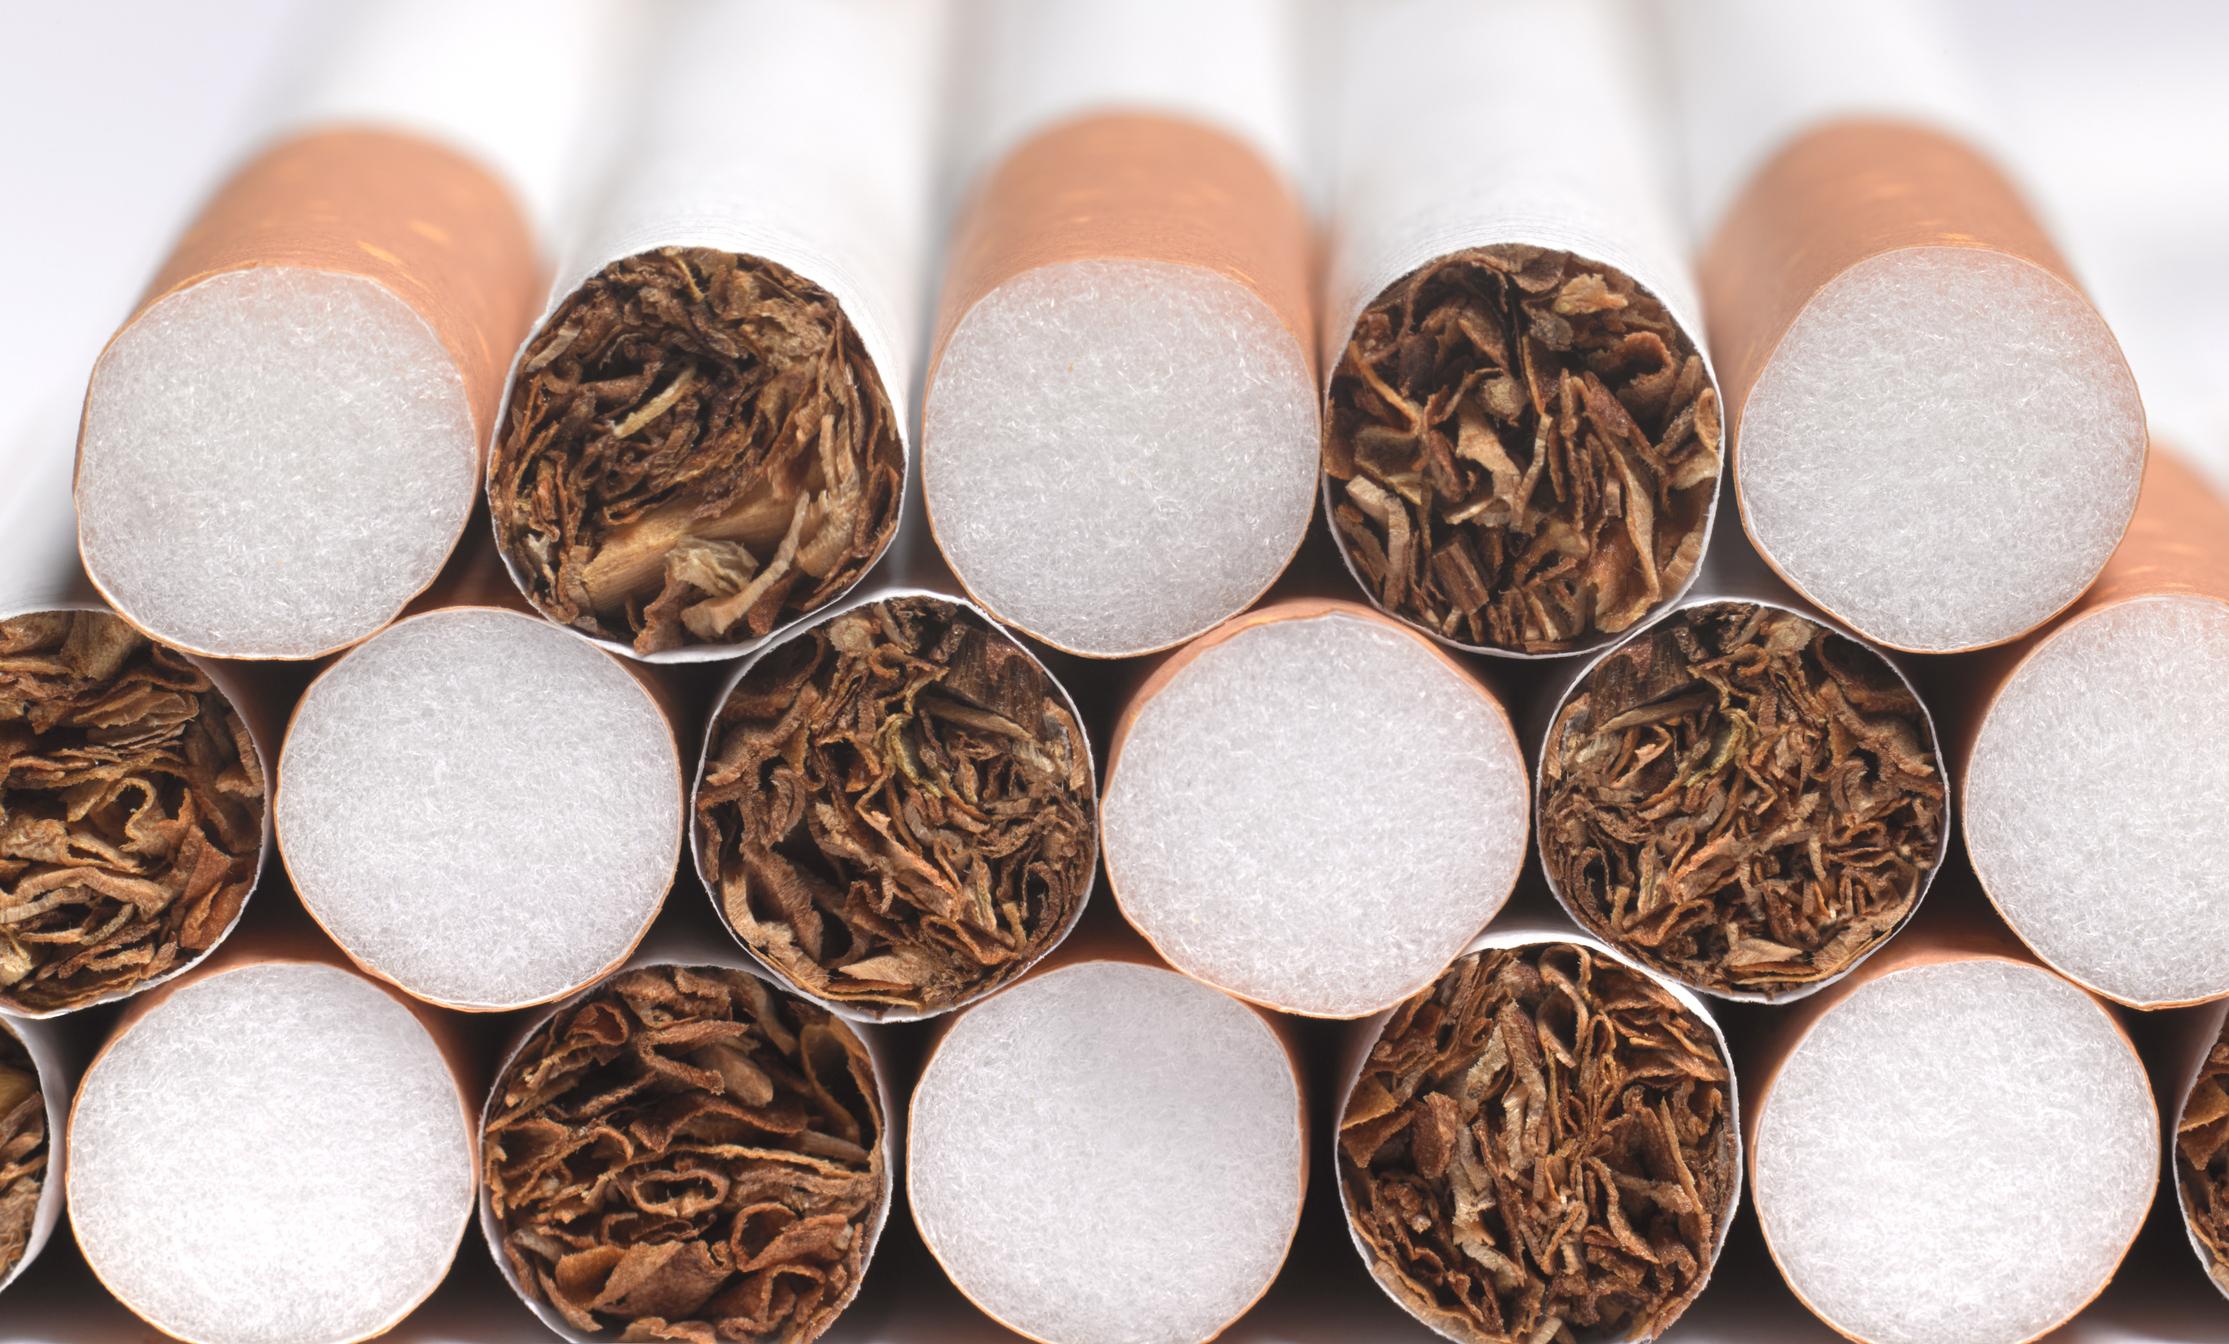 Biden Targets Tobacco: Will Require Lower Nicotine Levels In Cigarettes